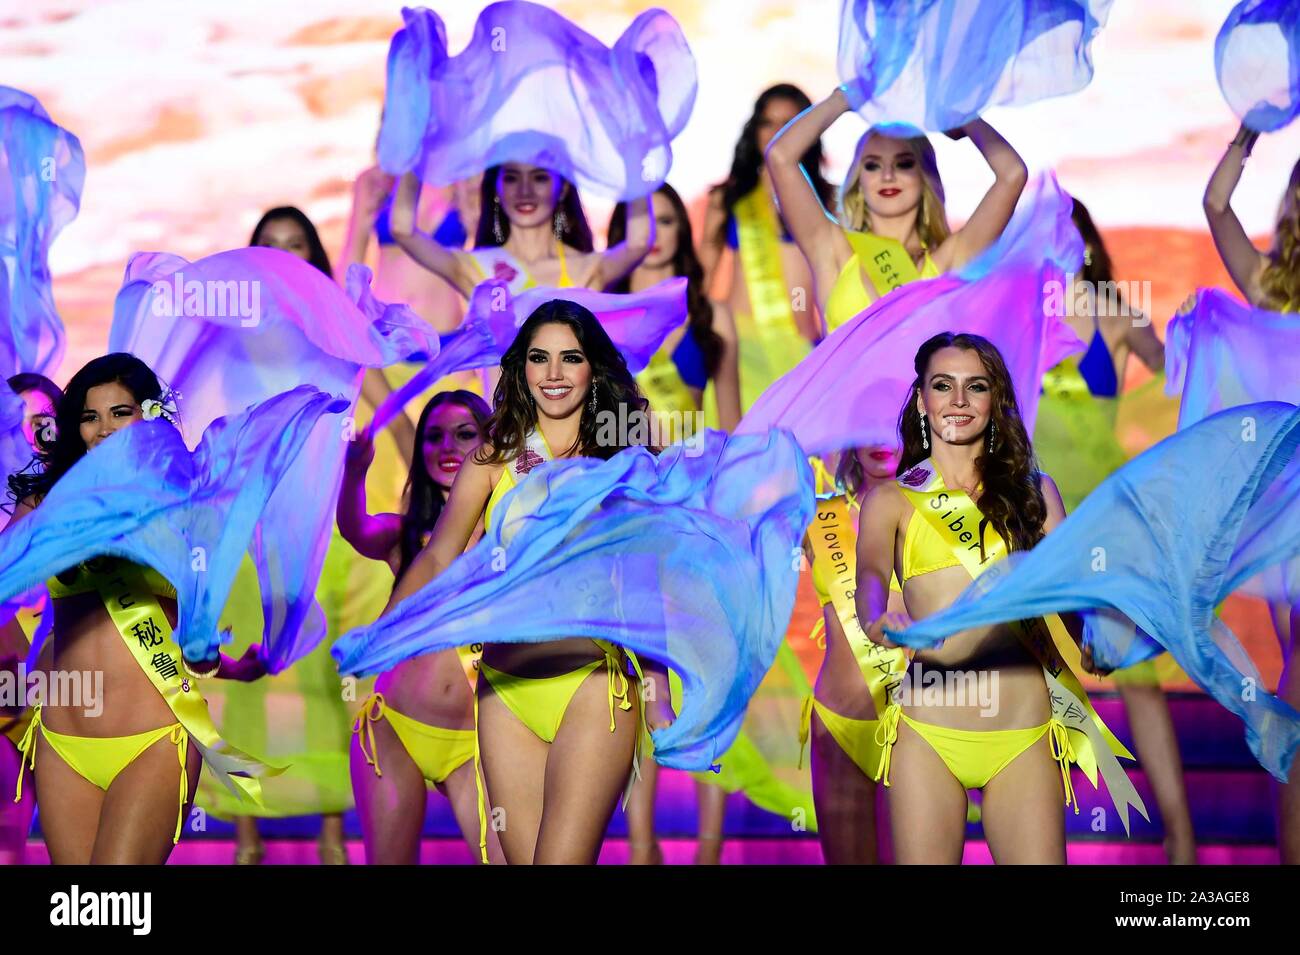 Qingdao, China. 6th Oct 2019.  Contestants wearing swimming suits pose during the Miss Tourism World 2019 Global Finals in Qingdao, east China's Shandong Province, Oct. 6, 2019. The beauty pageant concluded Sunday in the coastal city Qingdao, in which Miss Tourism Mexico Michelle Hewitt Zapata won the championship, Svetlana Mamaeva from Canada won the first runner-up, and Tan Ruoyi from China won the second runner-up.  United States, Venezuela, France, Brazil, SCO (Shanghai Cooperation Organization) member states as Credit: Xinhua/Alamy Live News Stock Photo